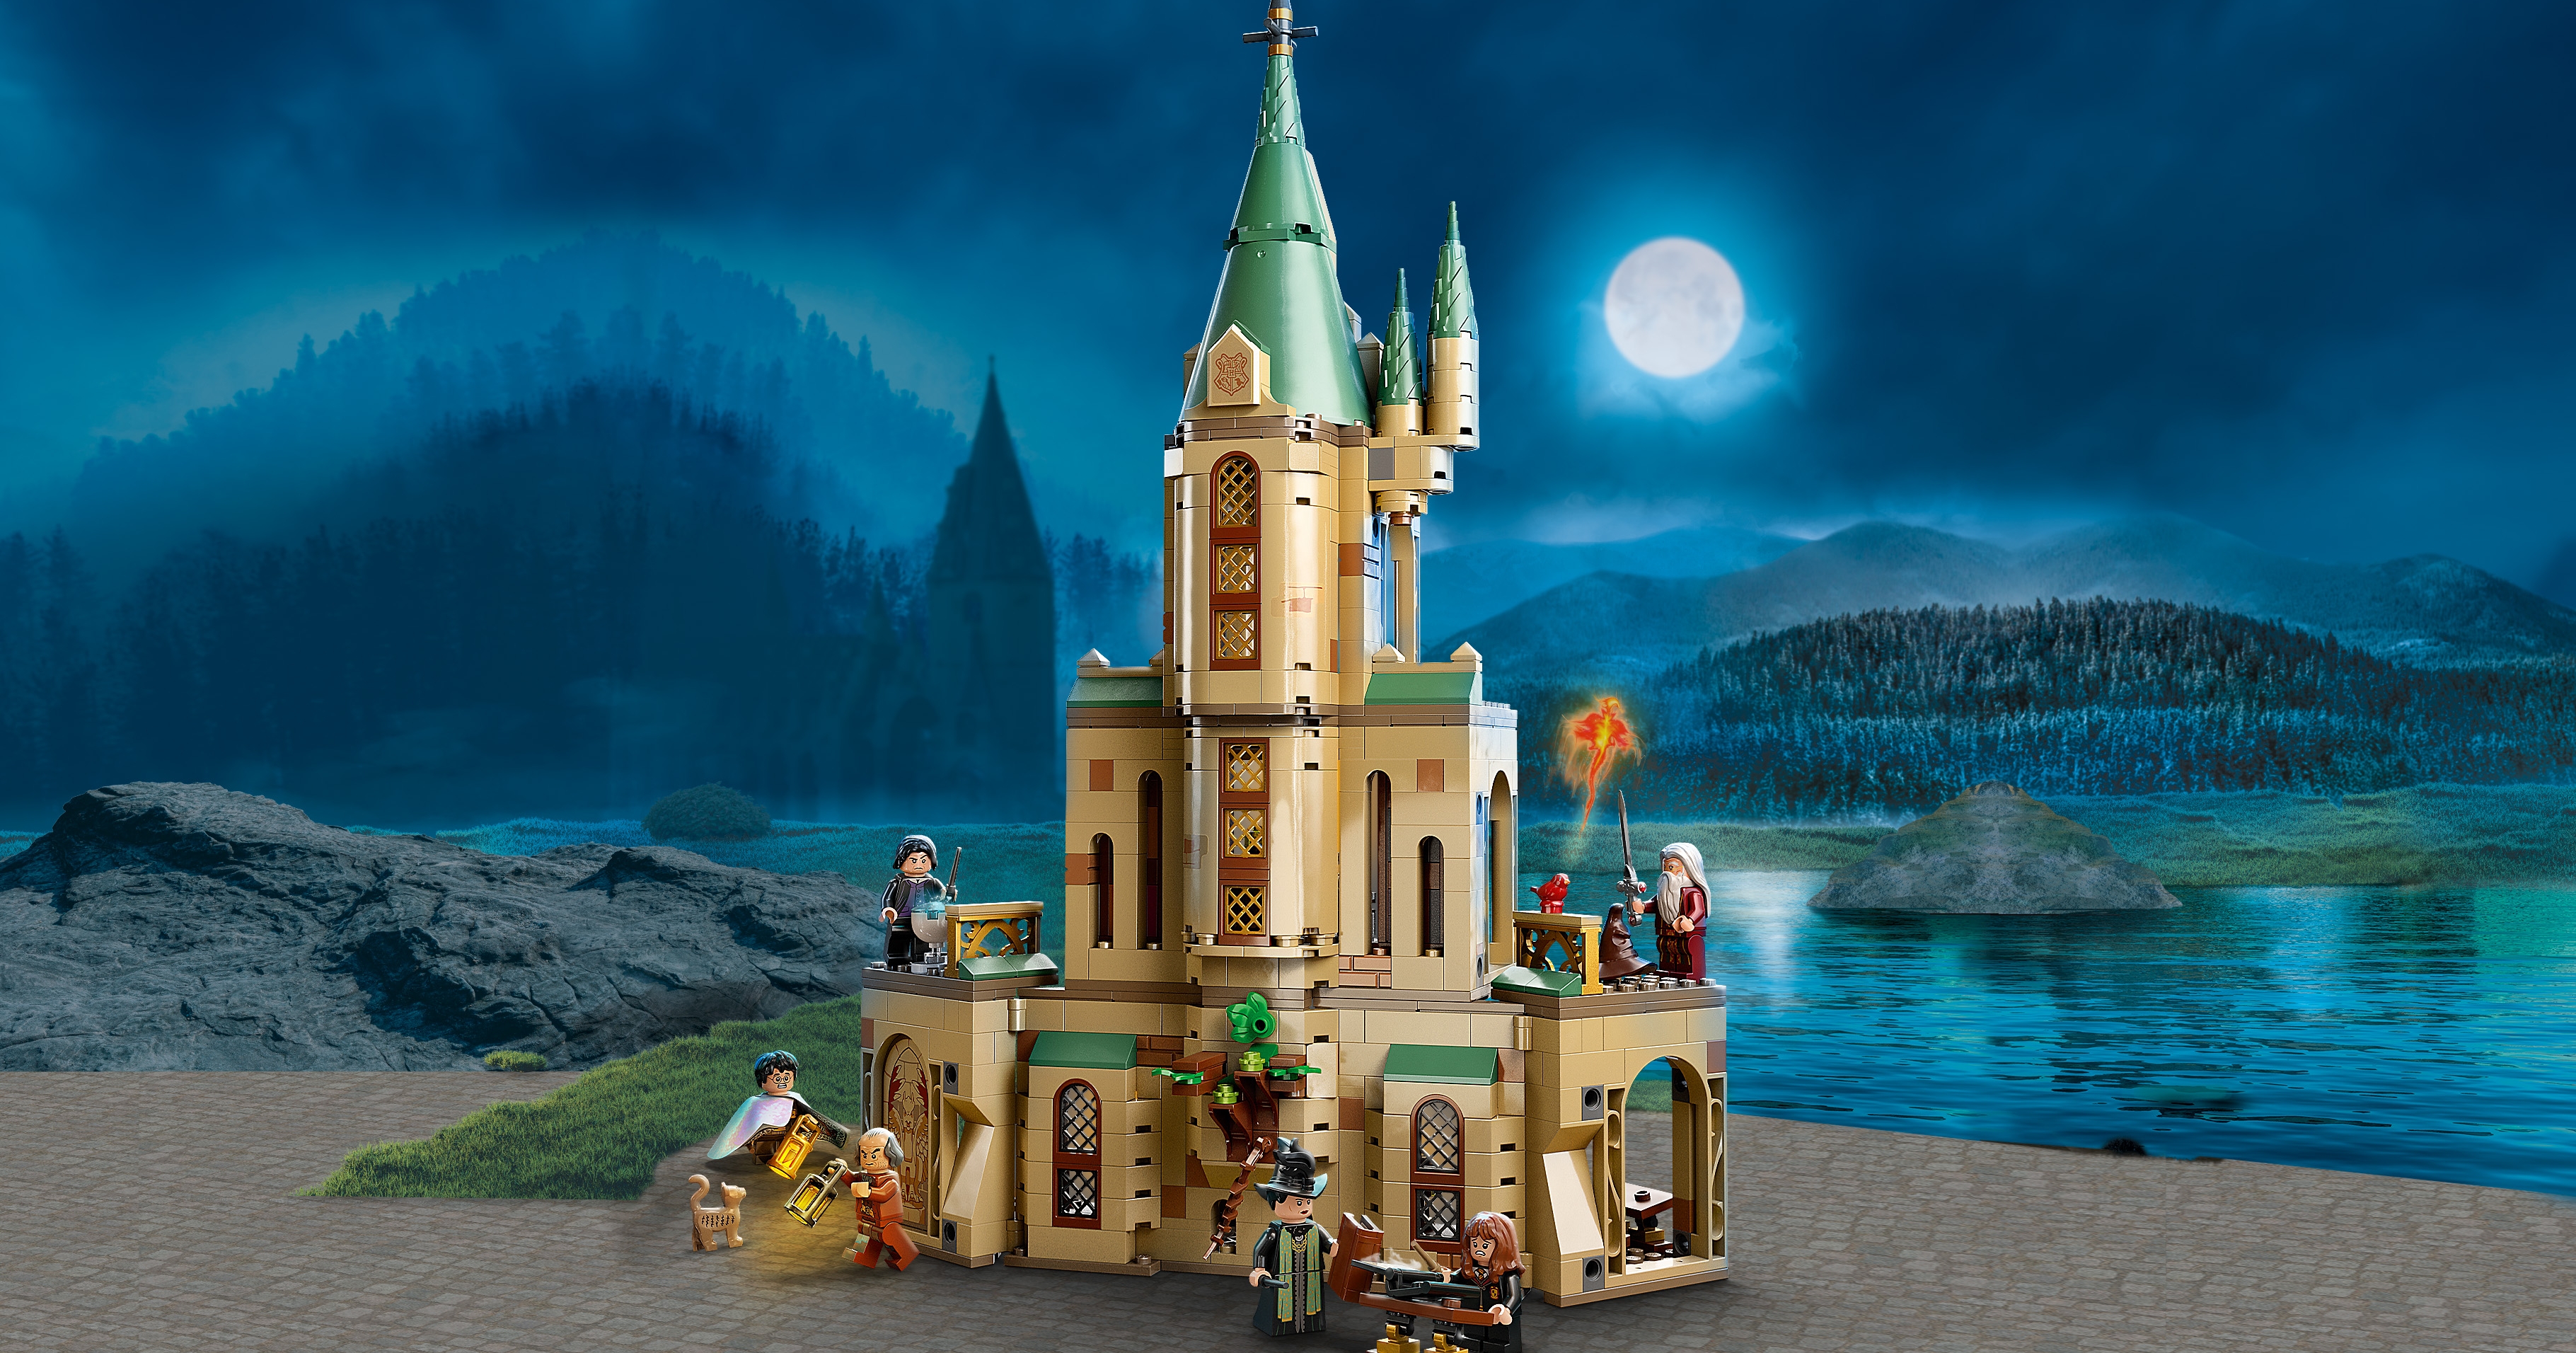 Building Kit Lego Harry Potter: Hogwarts - Dumbledore's office, Posters,  gifts, merchandise